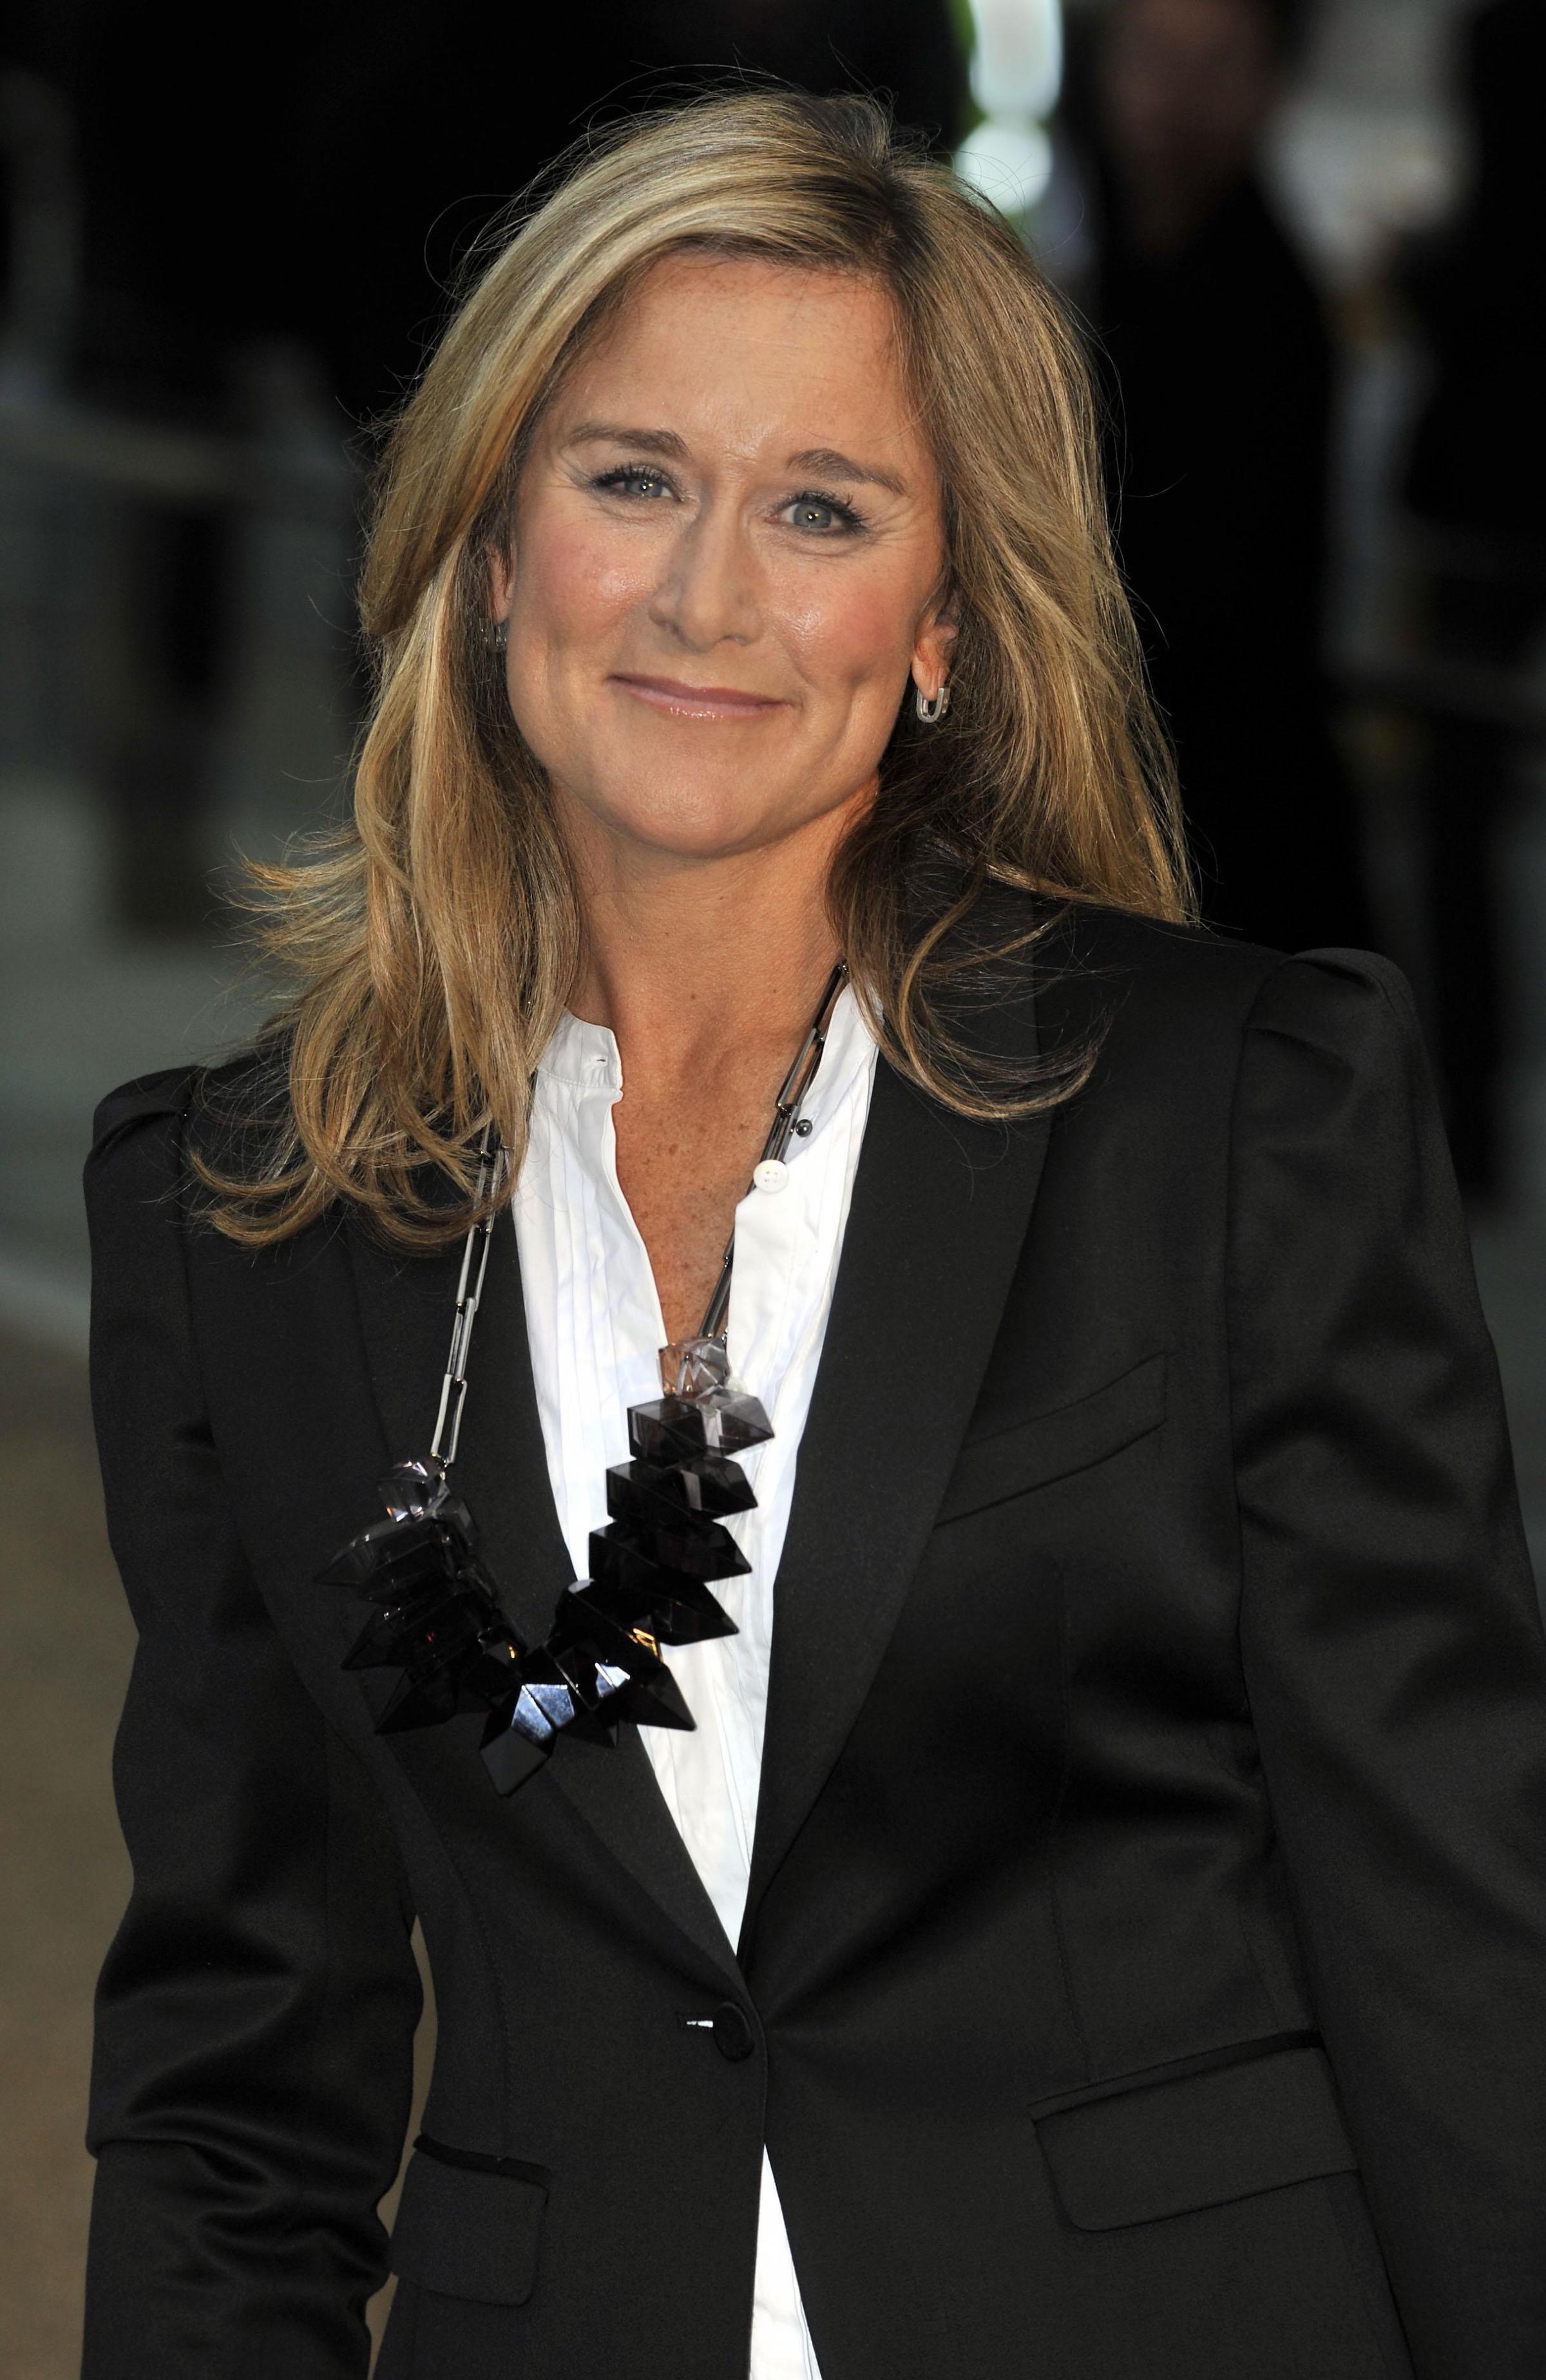 Burberry chief Angela quits to join Apple | The Northern Echo